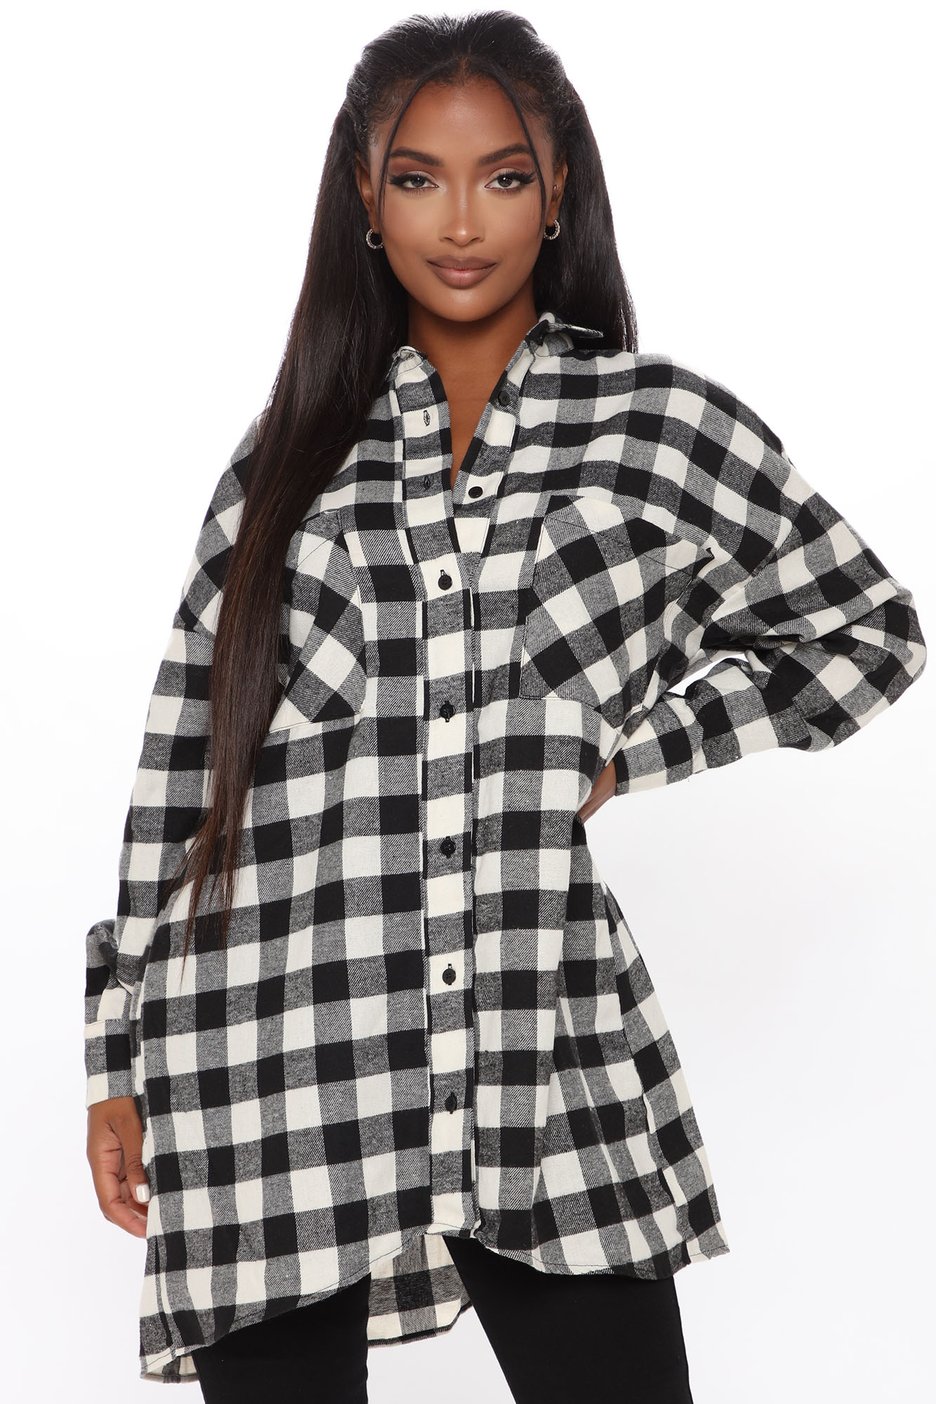 Brooke Valentine Rocks Fashion Nova Black and White Plaid Tunic While  Spending Time With Her Daughter Chí – Fashion Bomb Daily